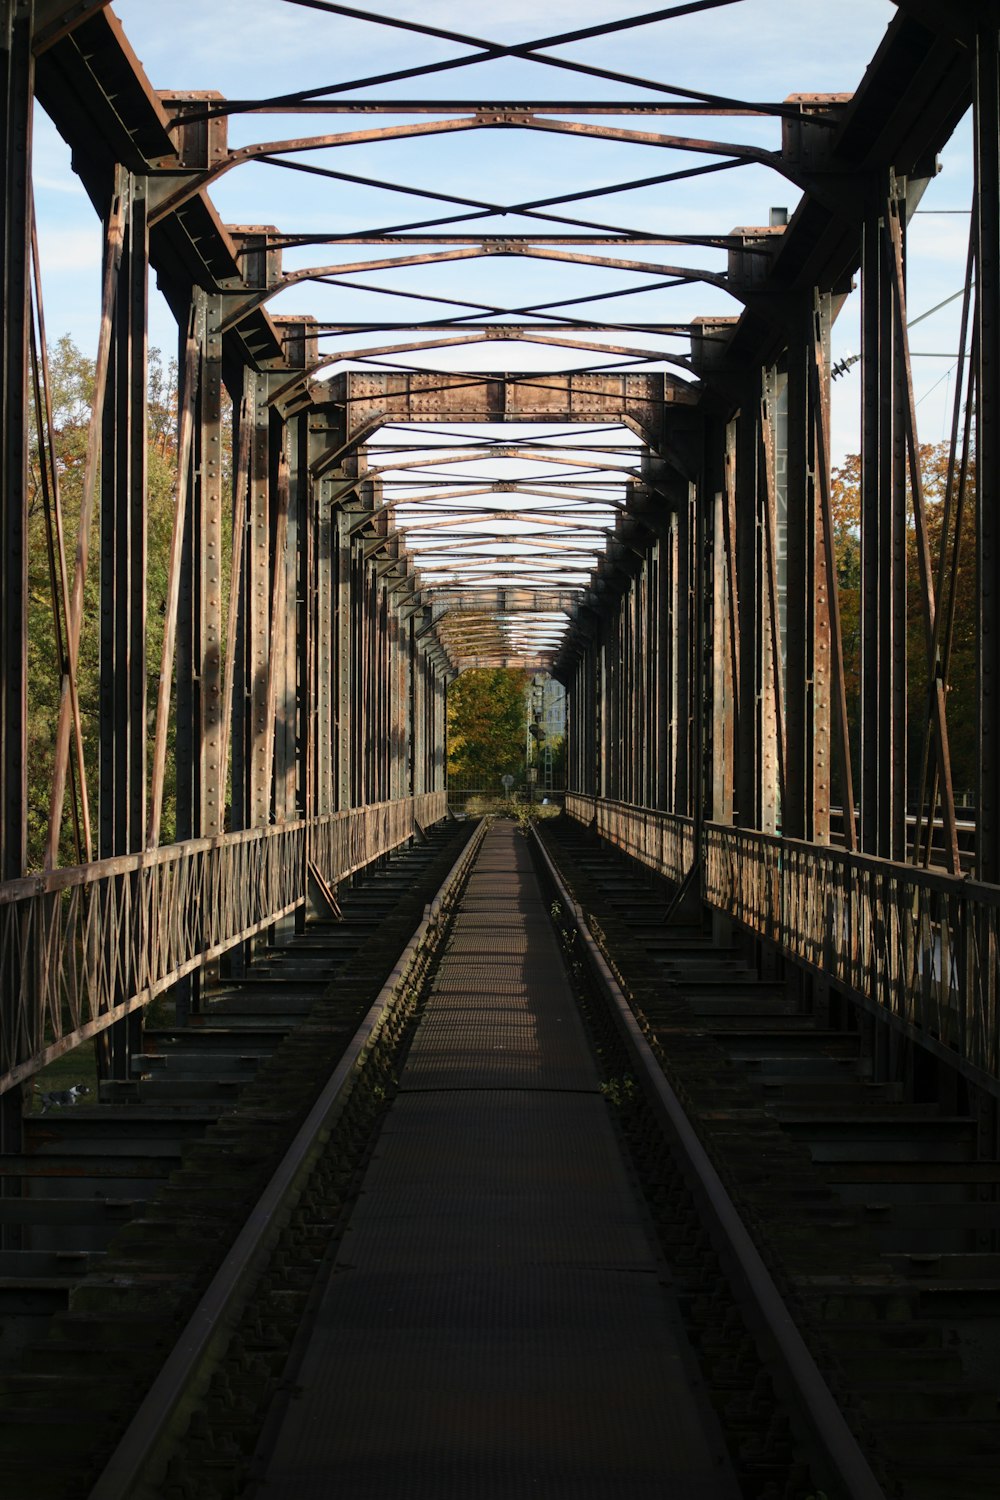 a view of a train track from the end of a bridge